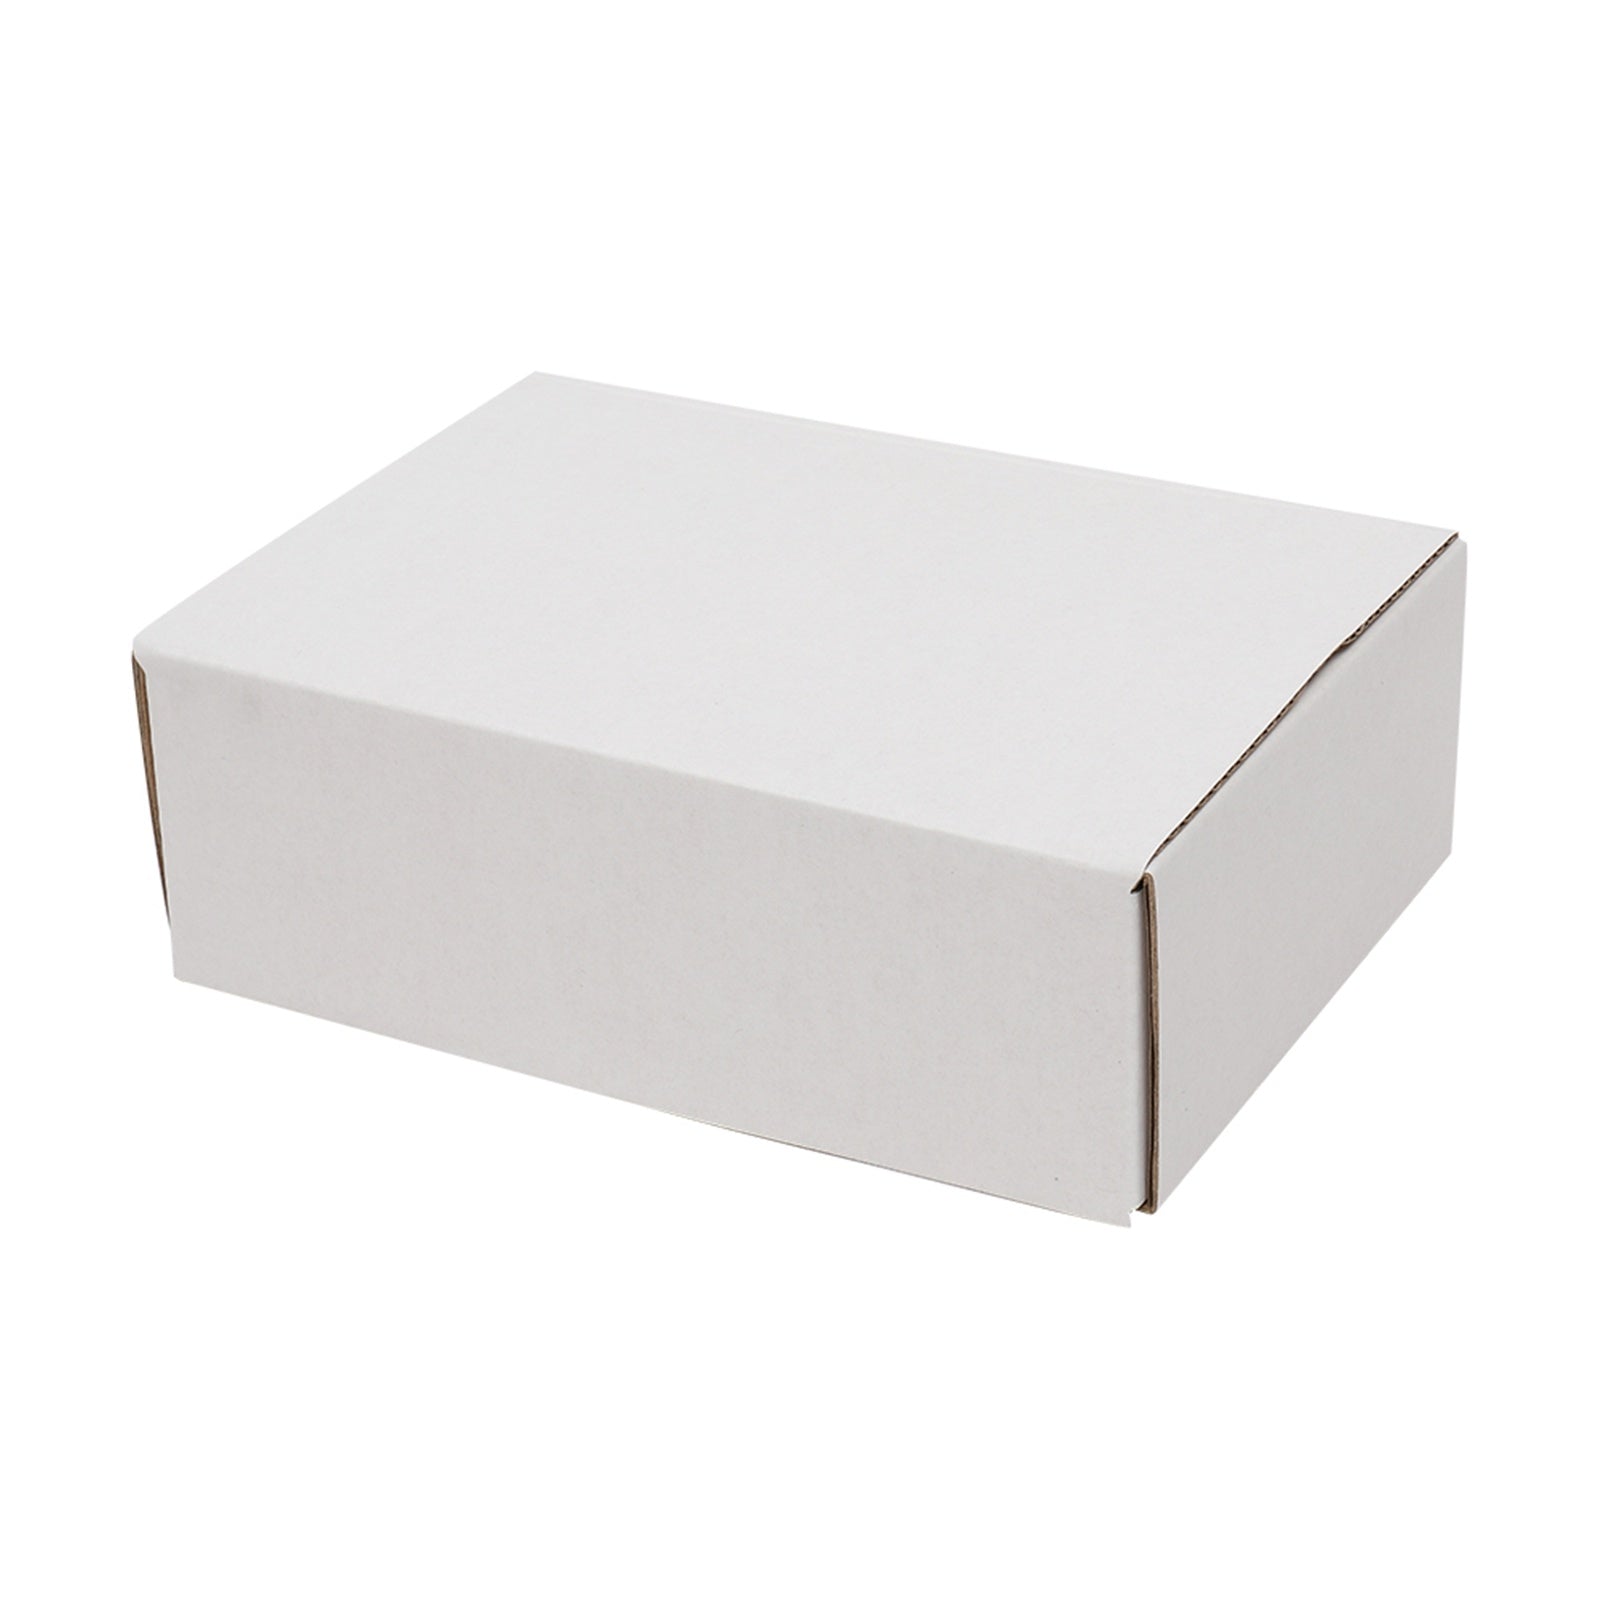 50 Pack 6x4x3 inch Corrugated Box Mailers- White Cardboard Shipping Box Corrugated Box Mailer Shipping Box for Mailer RT